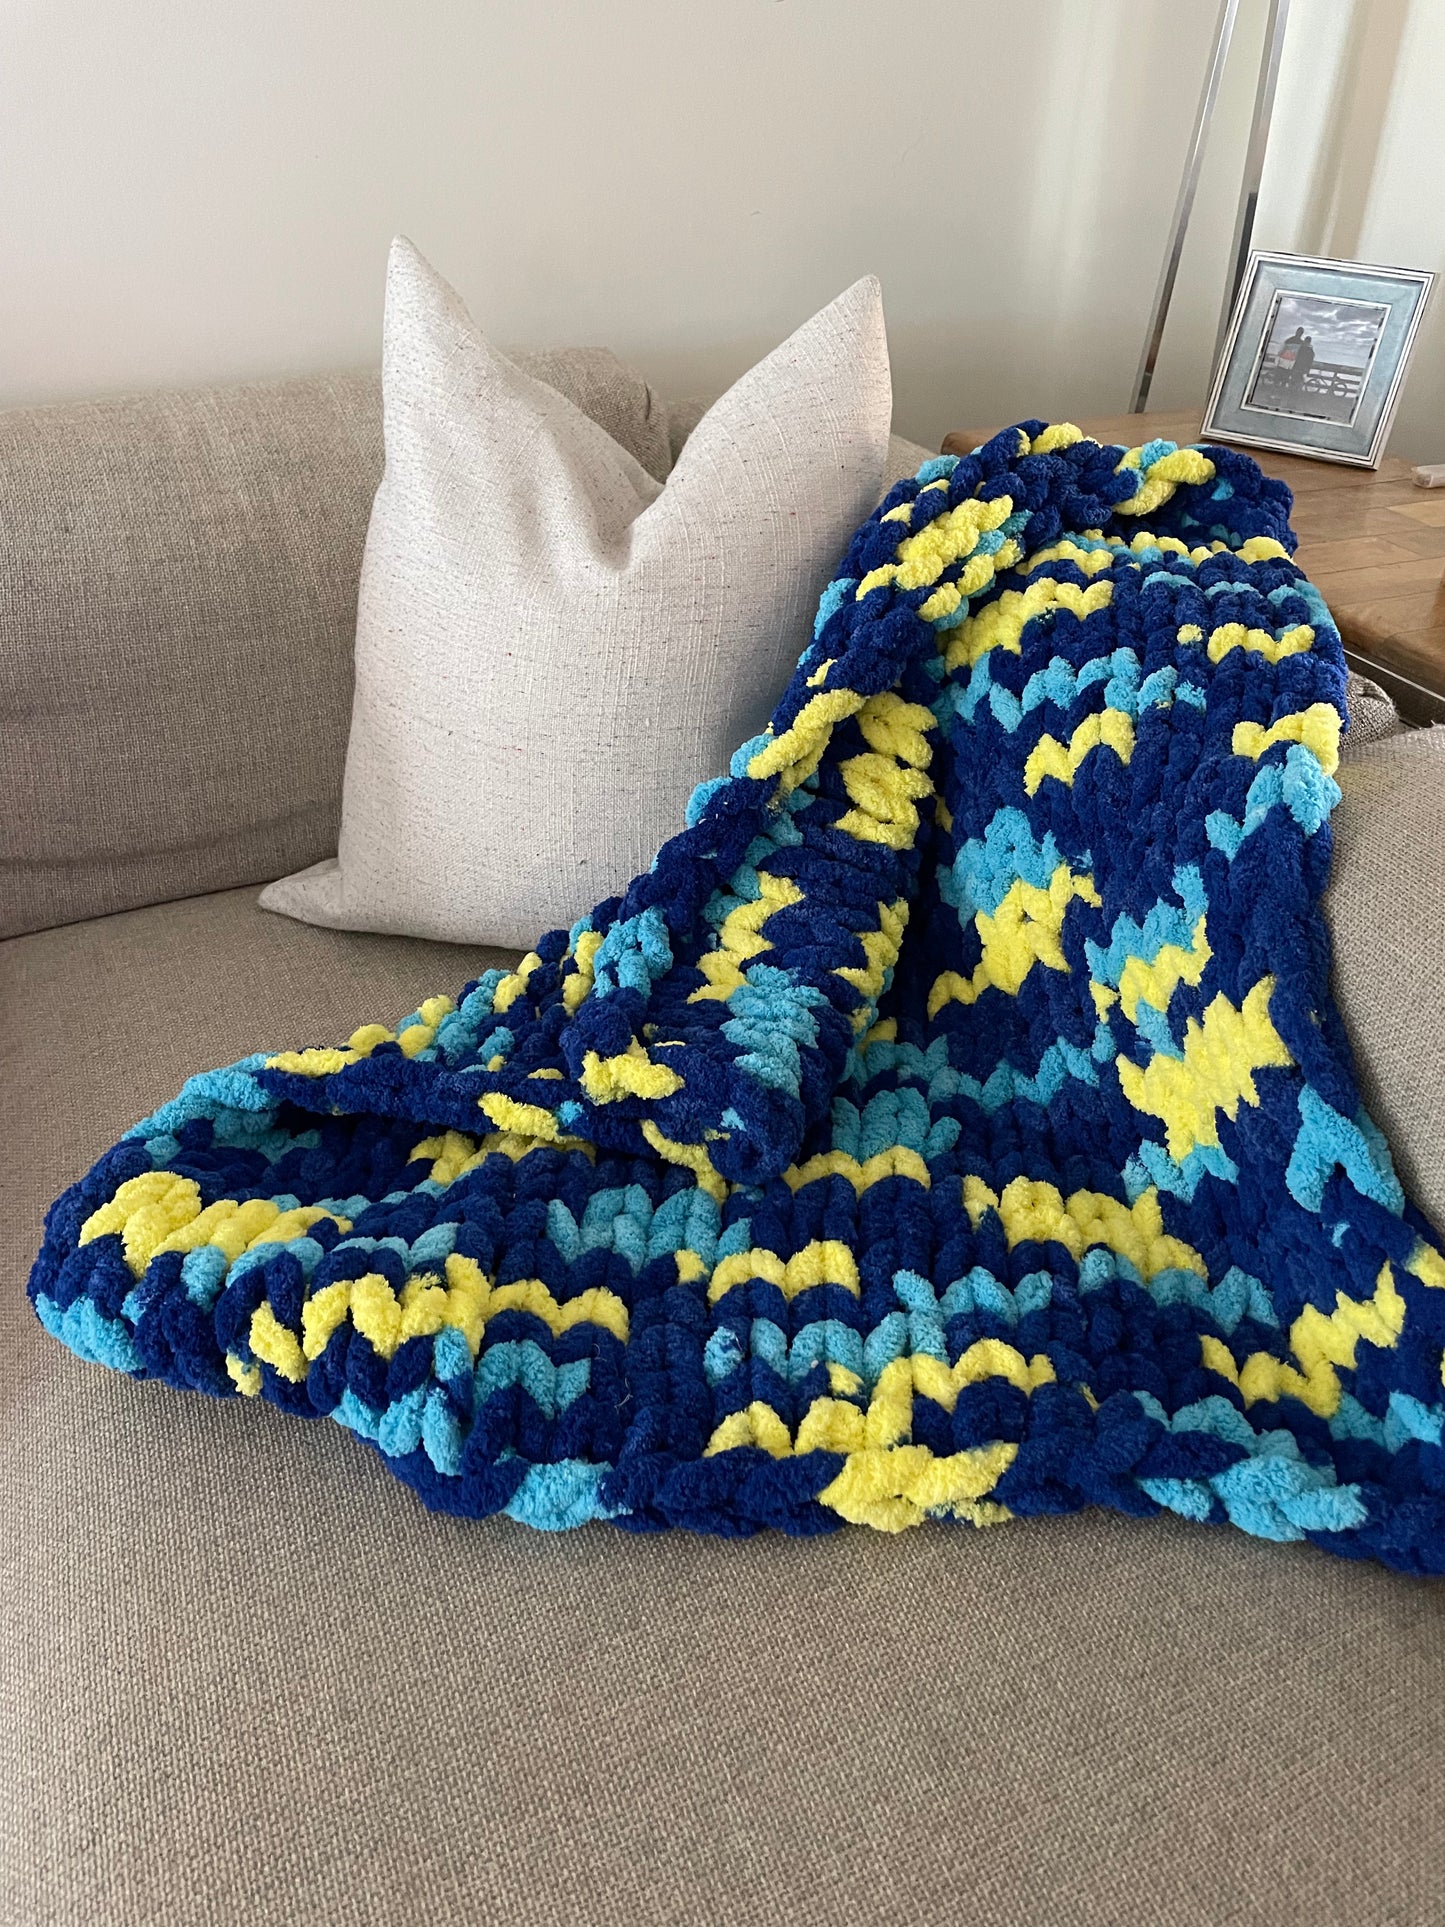 Healing Hand, Chunky Knit Baby Blankets - Superkid mix